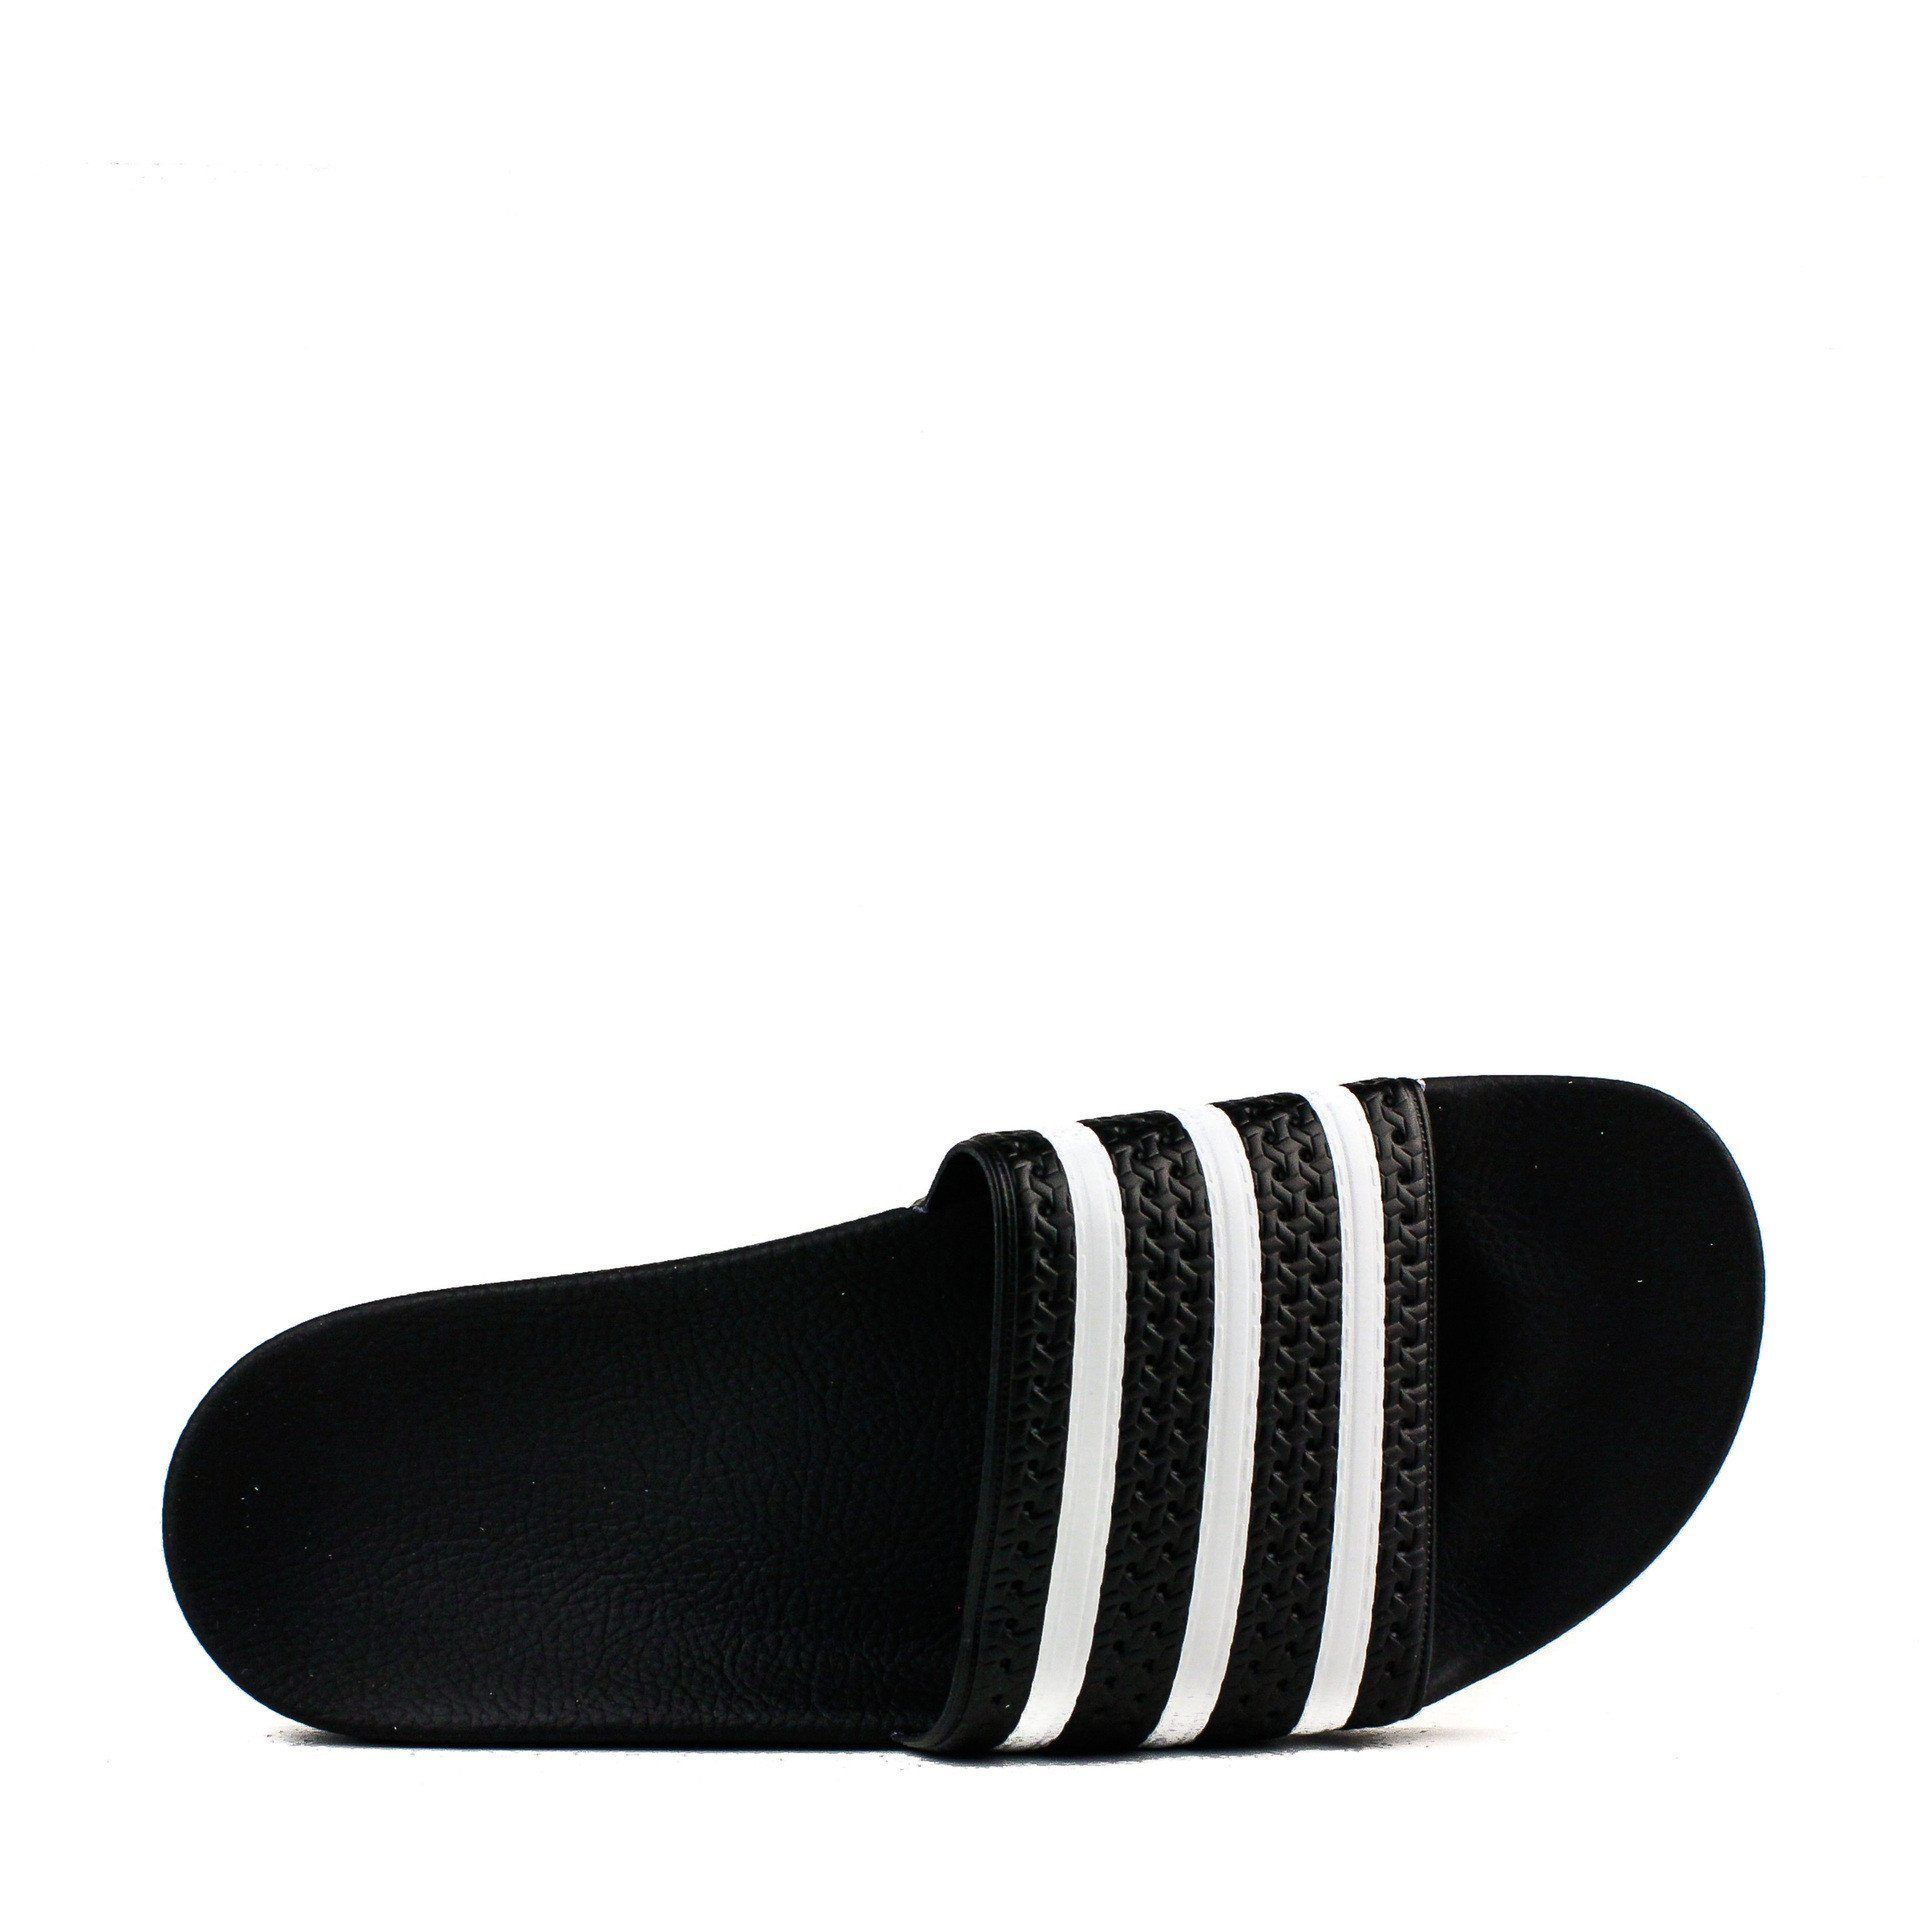 JofemarShops - adidas instagram world cup results 2018 - Adidas Originals Adilette Black White Slides Made In Italy 280647 (Fast shipping)